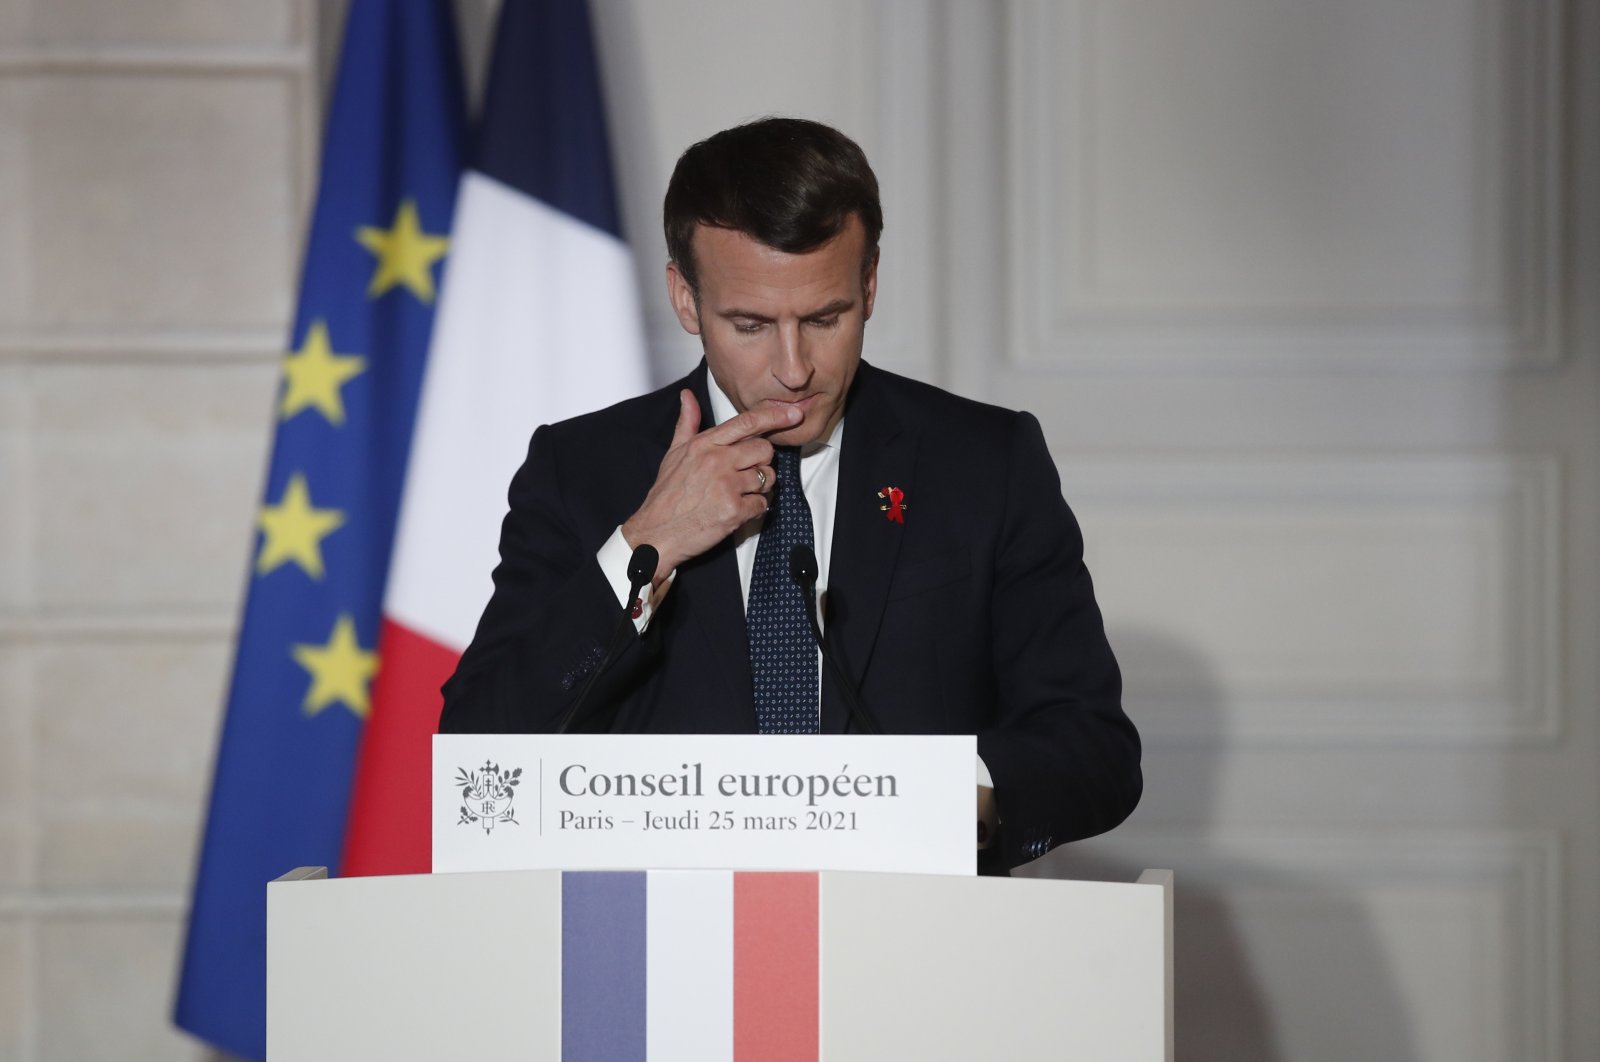 French President Emmanuel Macron speaks during a press conference after a European Council summit held over videoconference at the Elysee Palace, Paris, France, March 25, 2021. (EPA Photo)